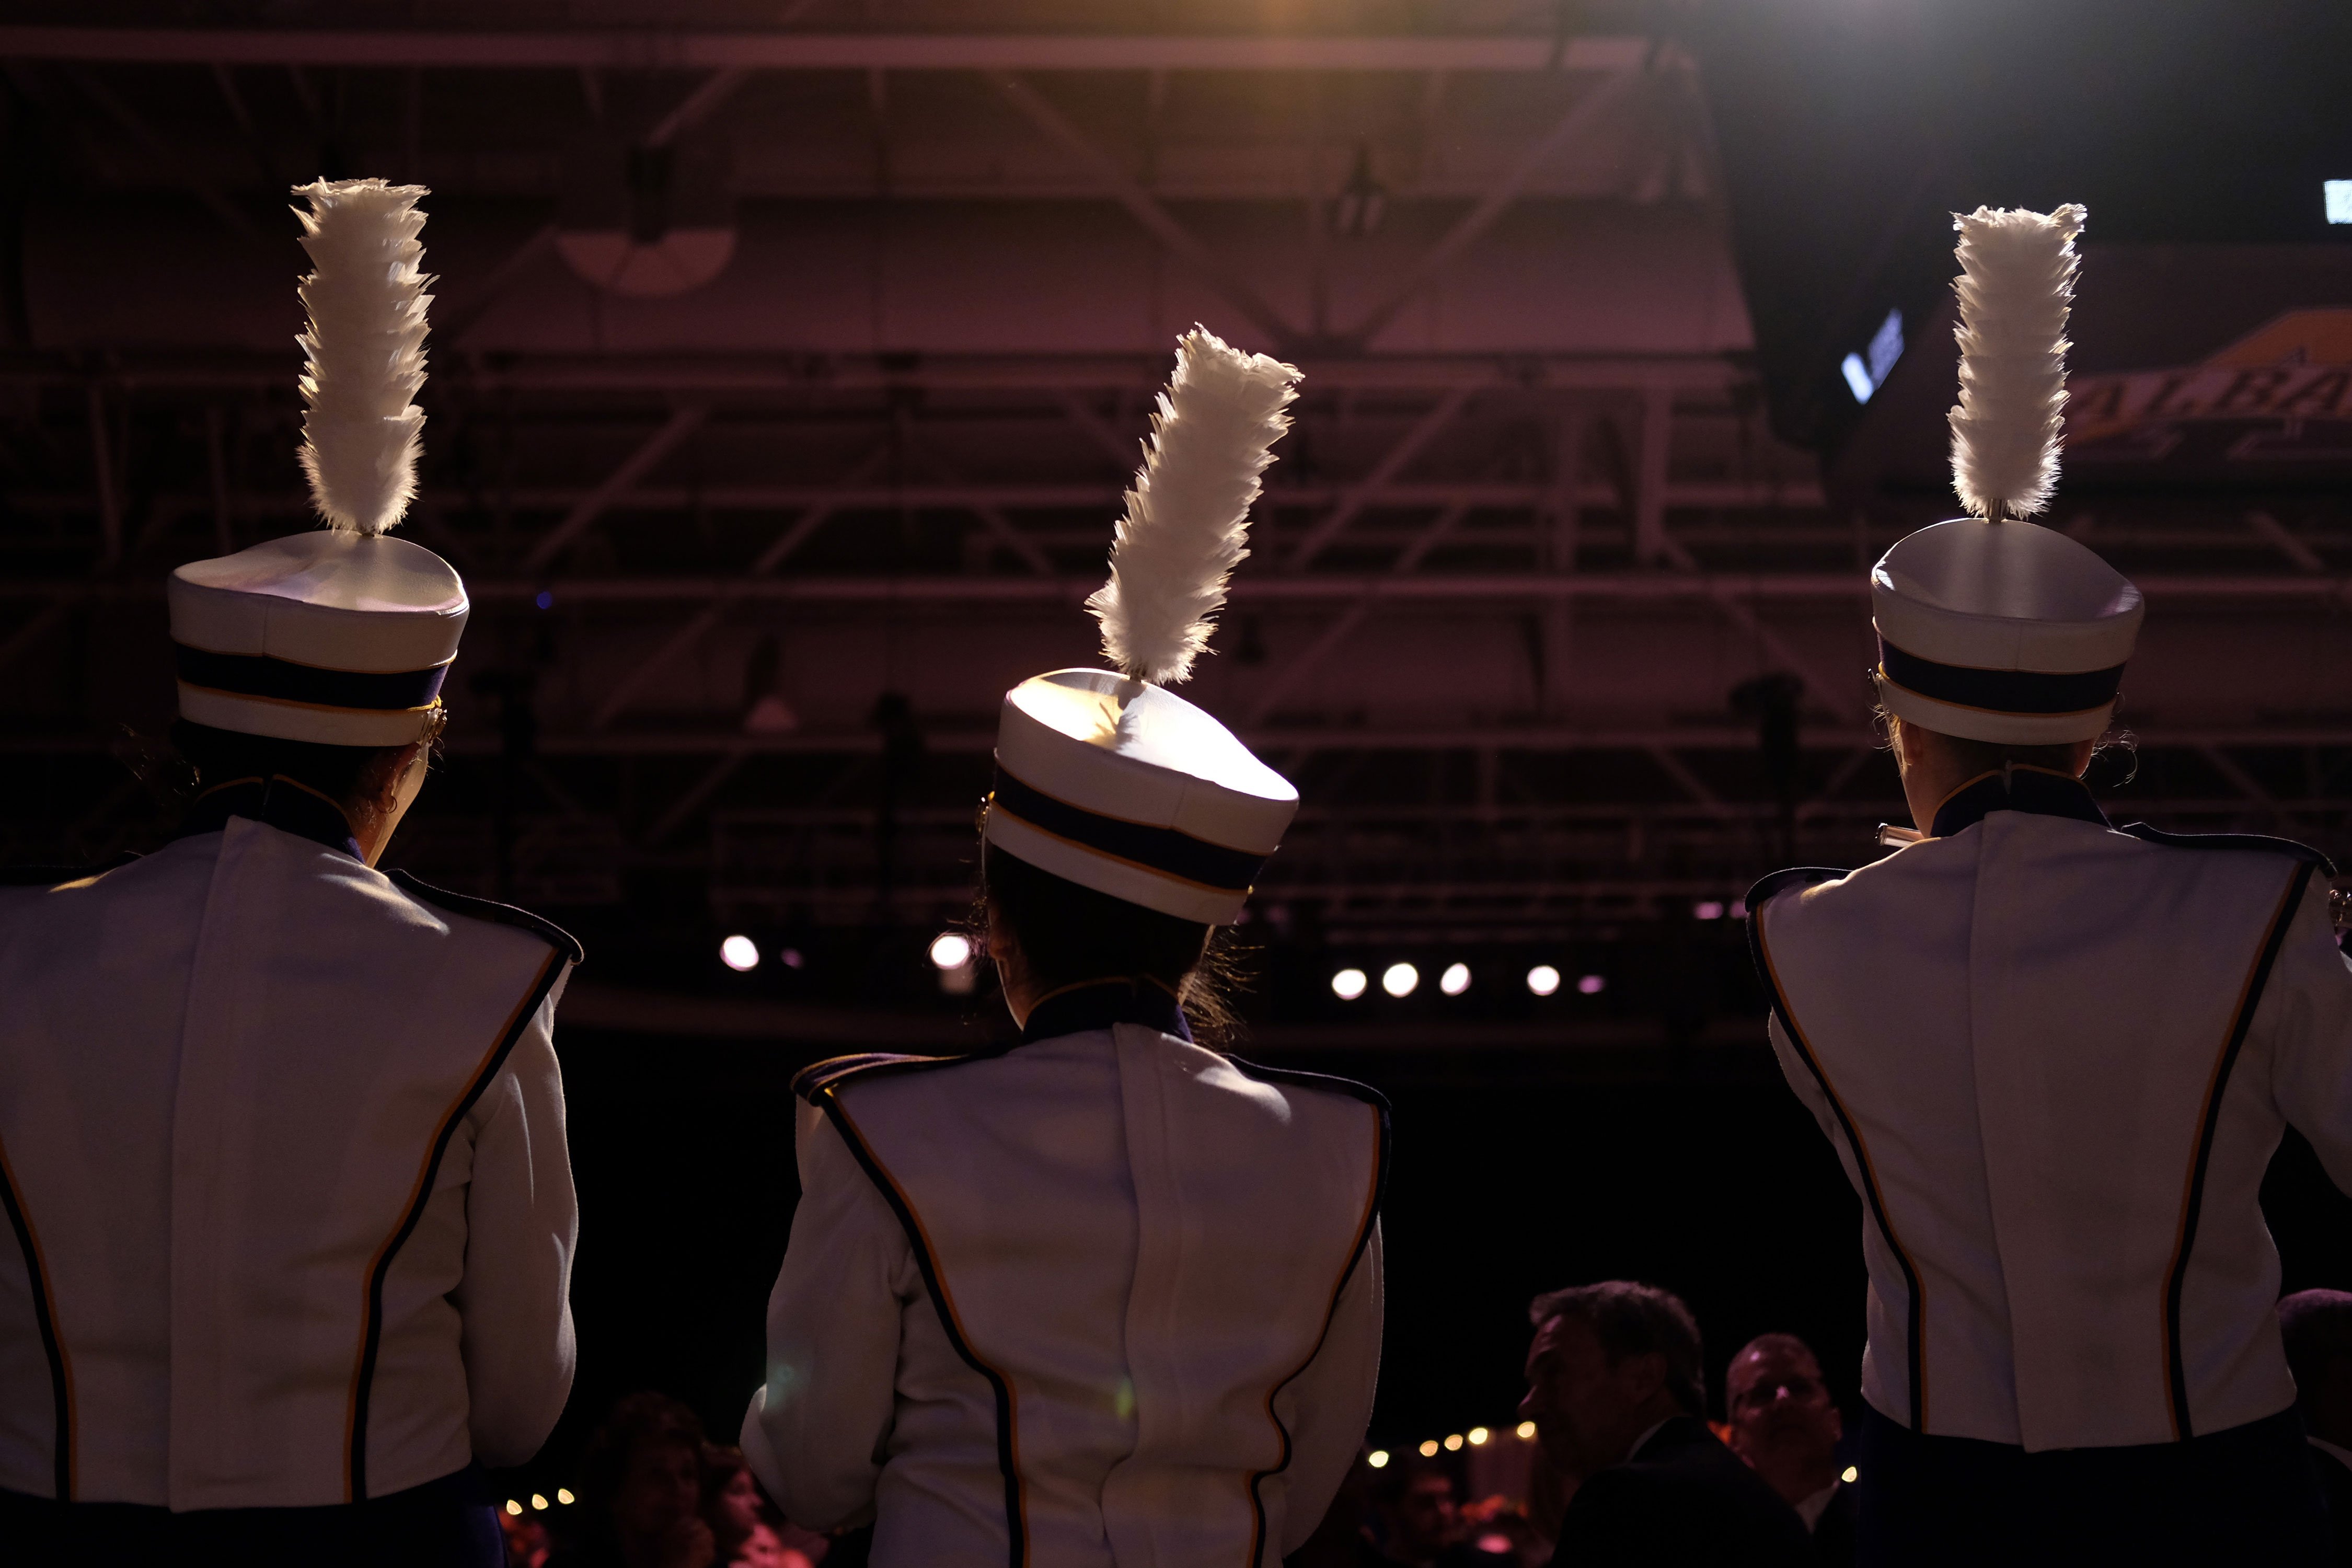 Three students in Marching Band uniforms and hats face away from the camera in a darkened SEFCU Arena.